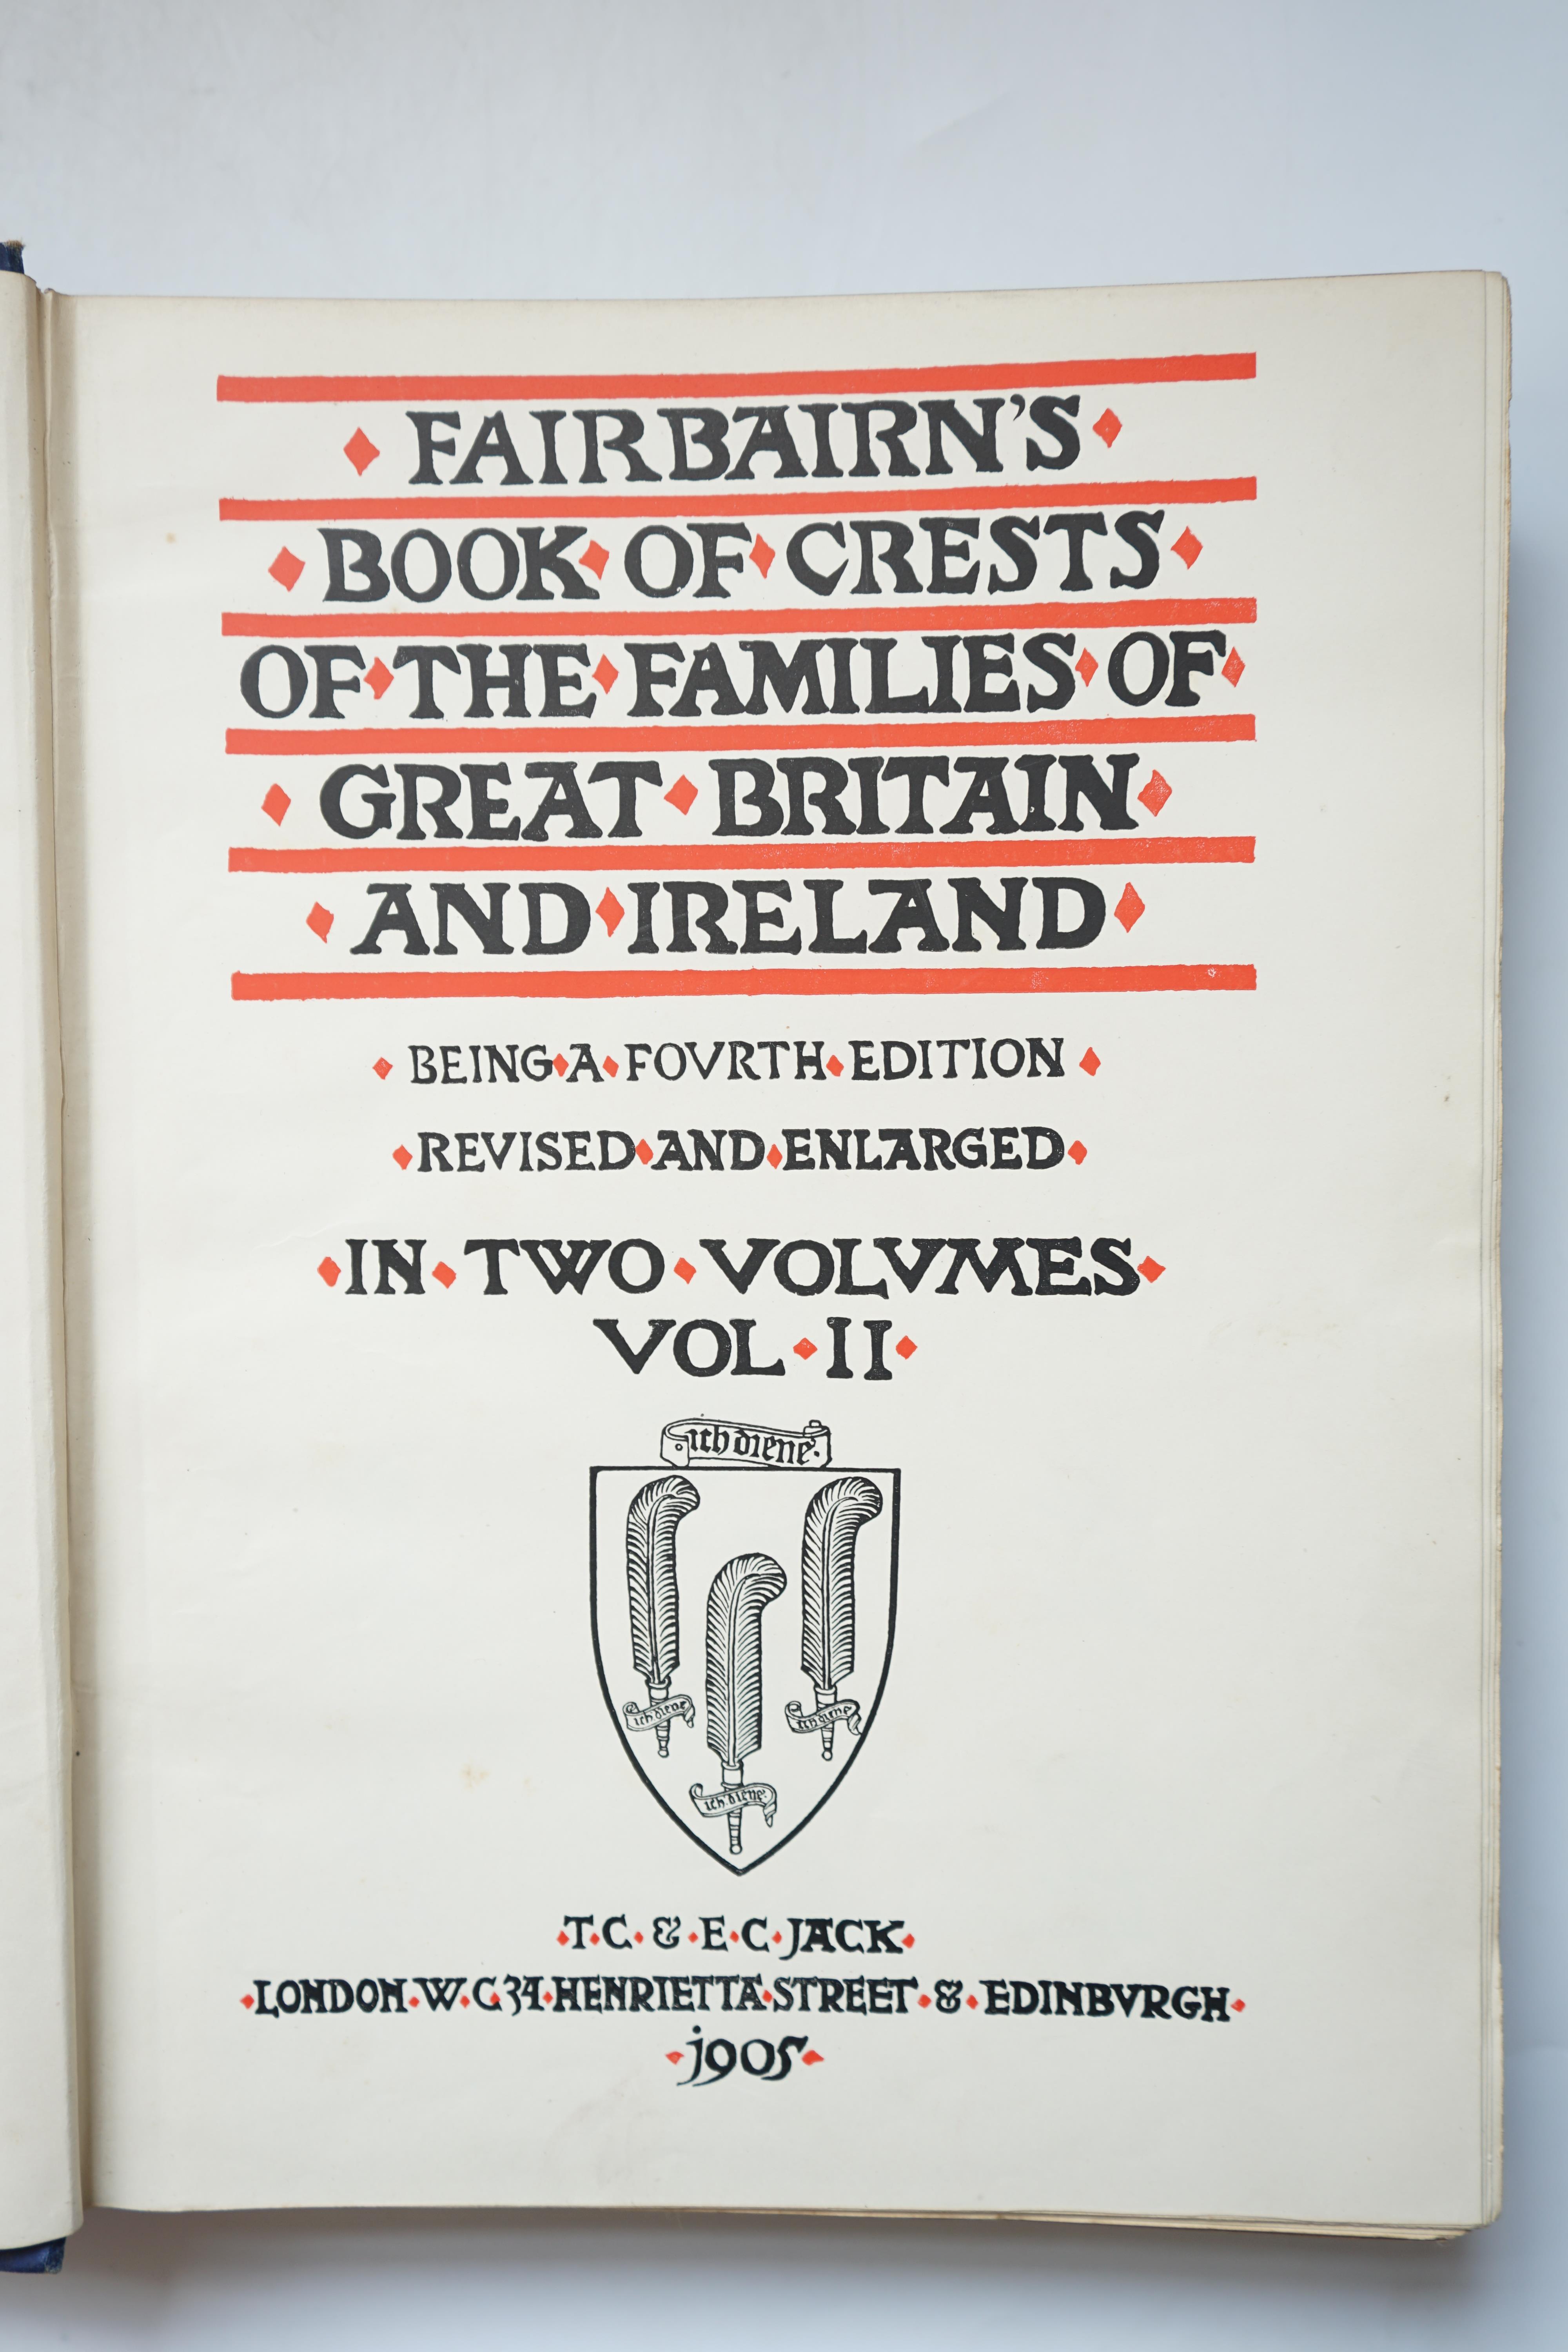 Fairbairn, James - Fairbairn’s Book of Crests of the Families of Great Britain and Ireland, 4th edition, 2 vols. 4to, blue cloth gilt, with 314 plates, T.C & E.C. Jack, London, 1905.